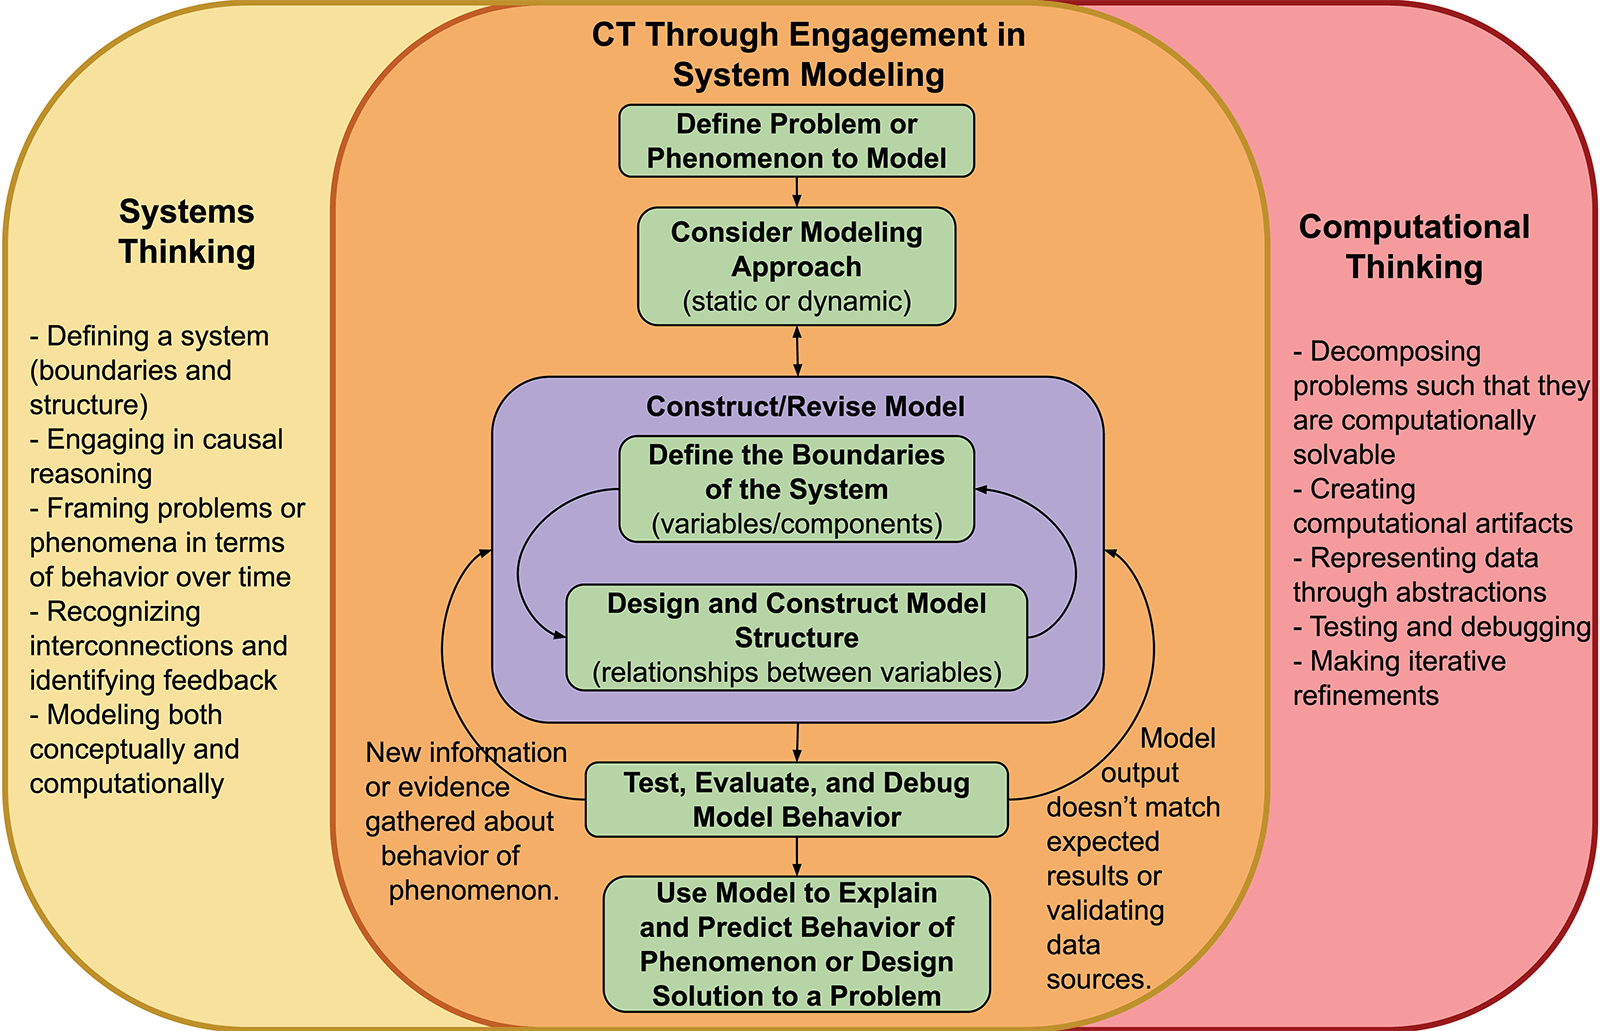 A theoretical framework of system modeling that combines aspects of systems thinking (left) and computational thinking (right).